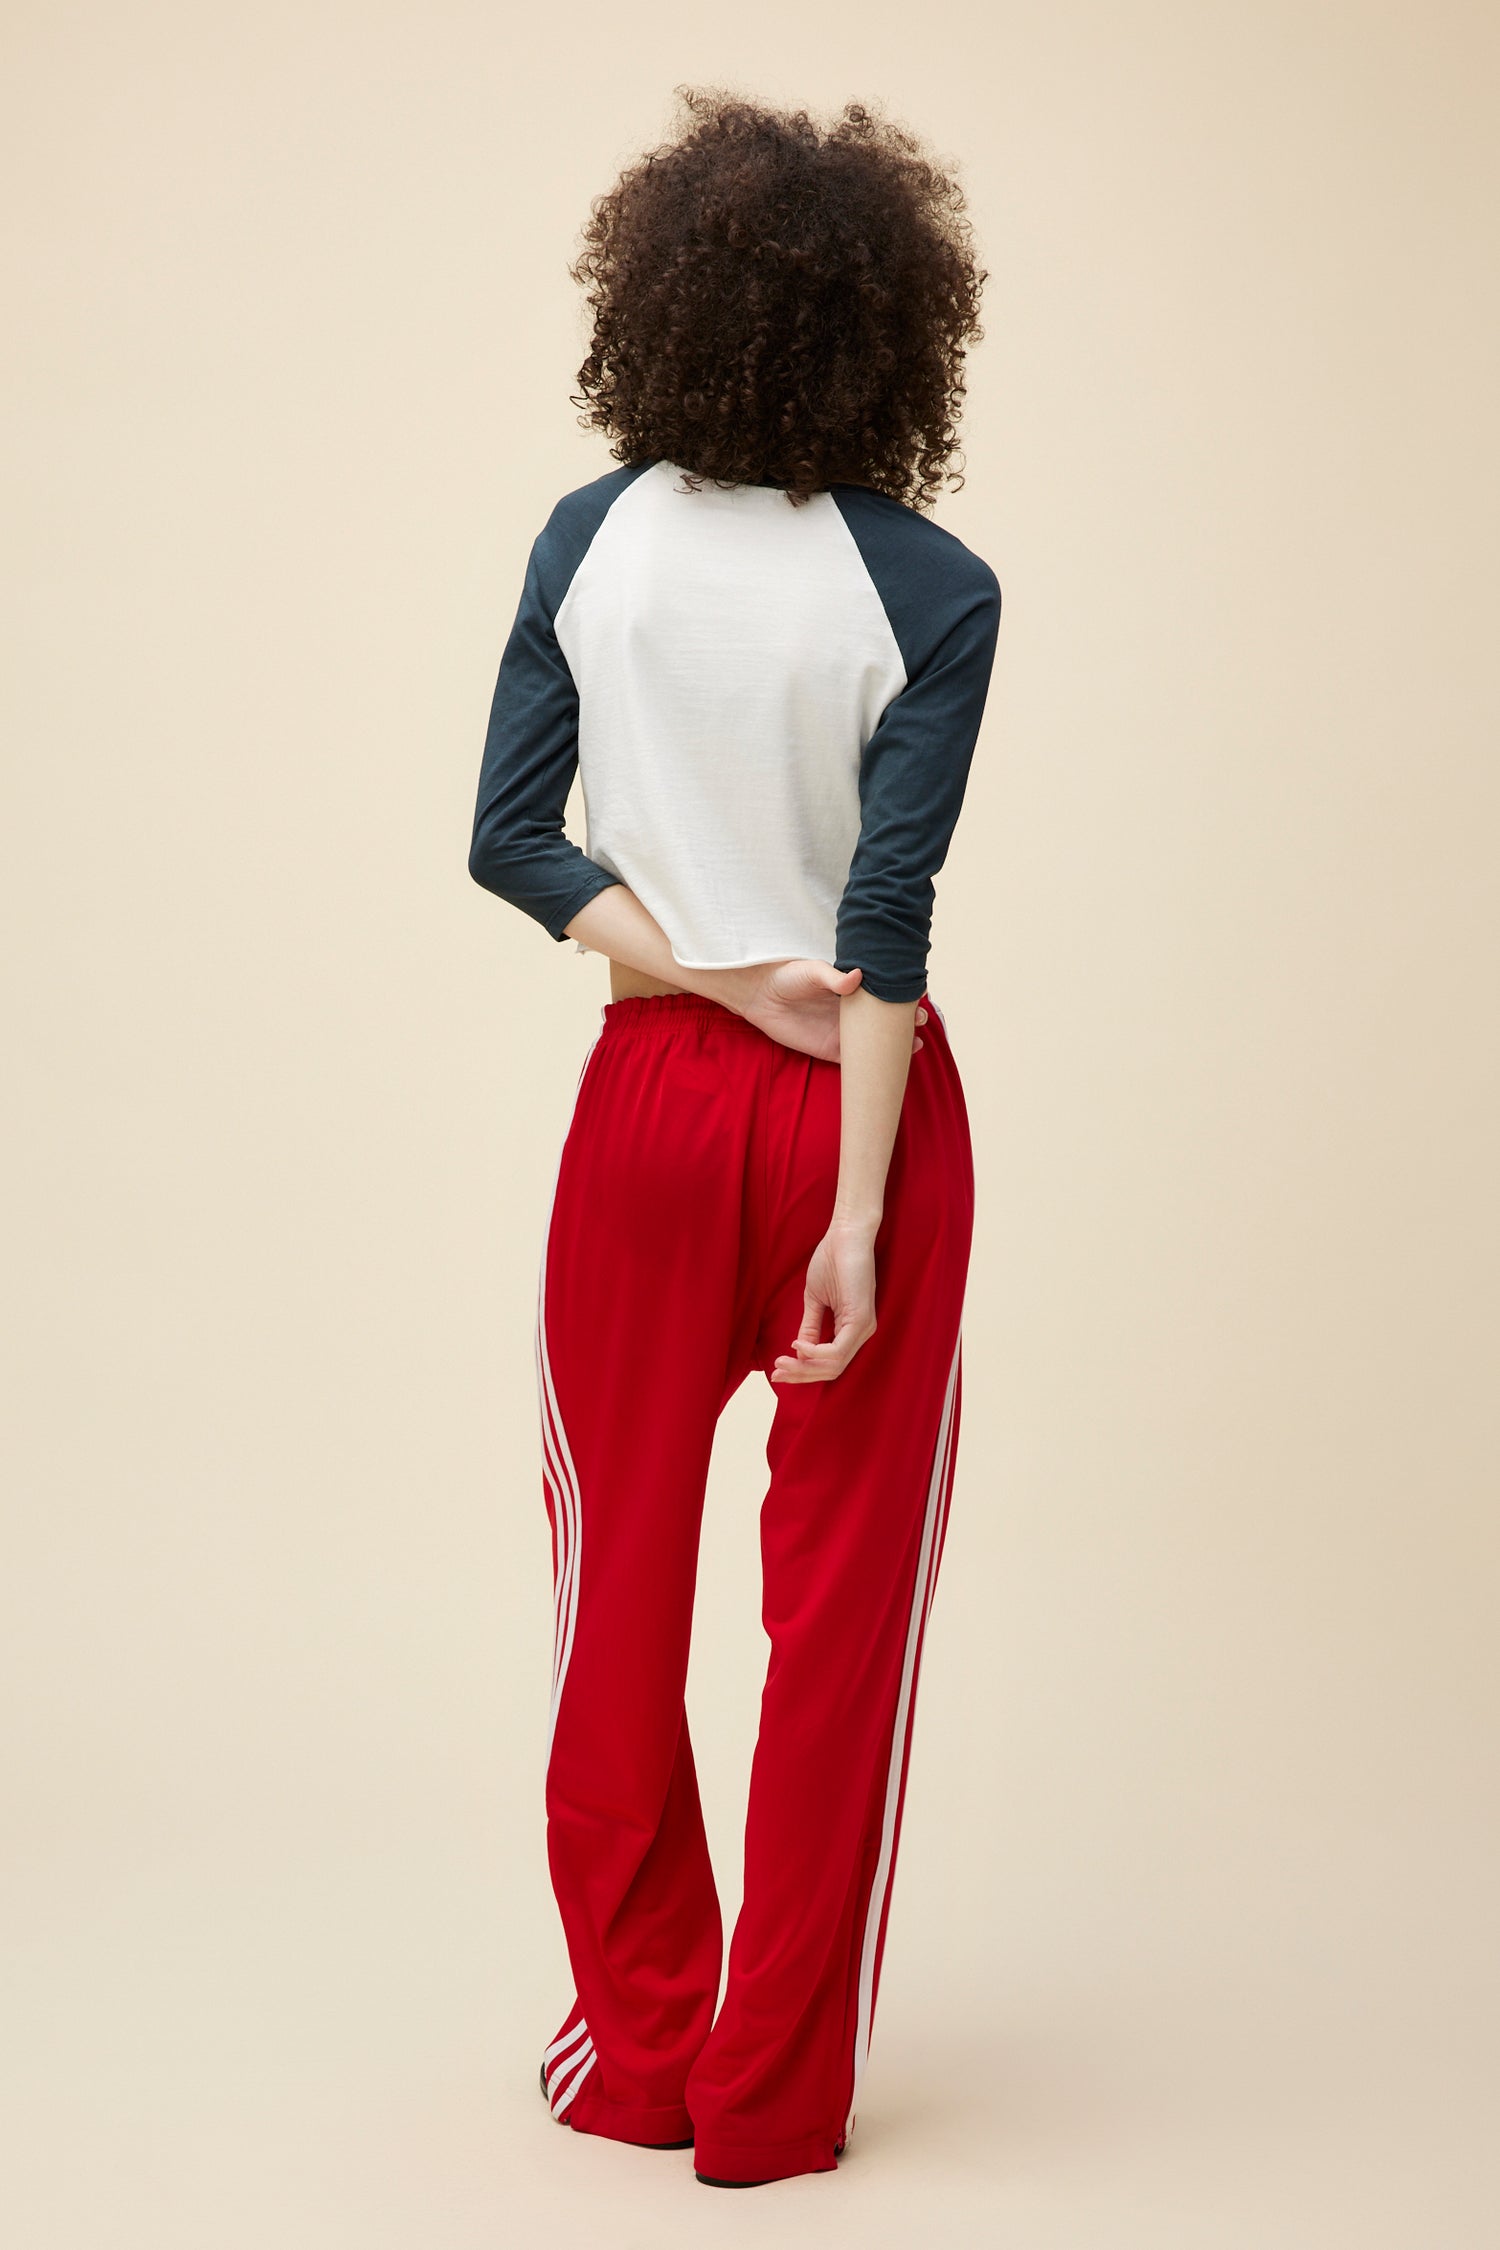 A curly-haired model wears a vintage-inspired long sleeve raglan tee with a red cherry graphic on the front.